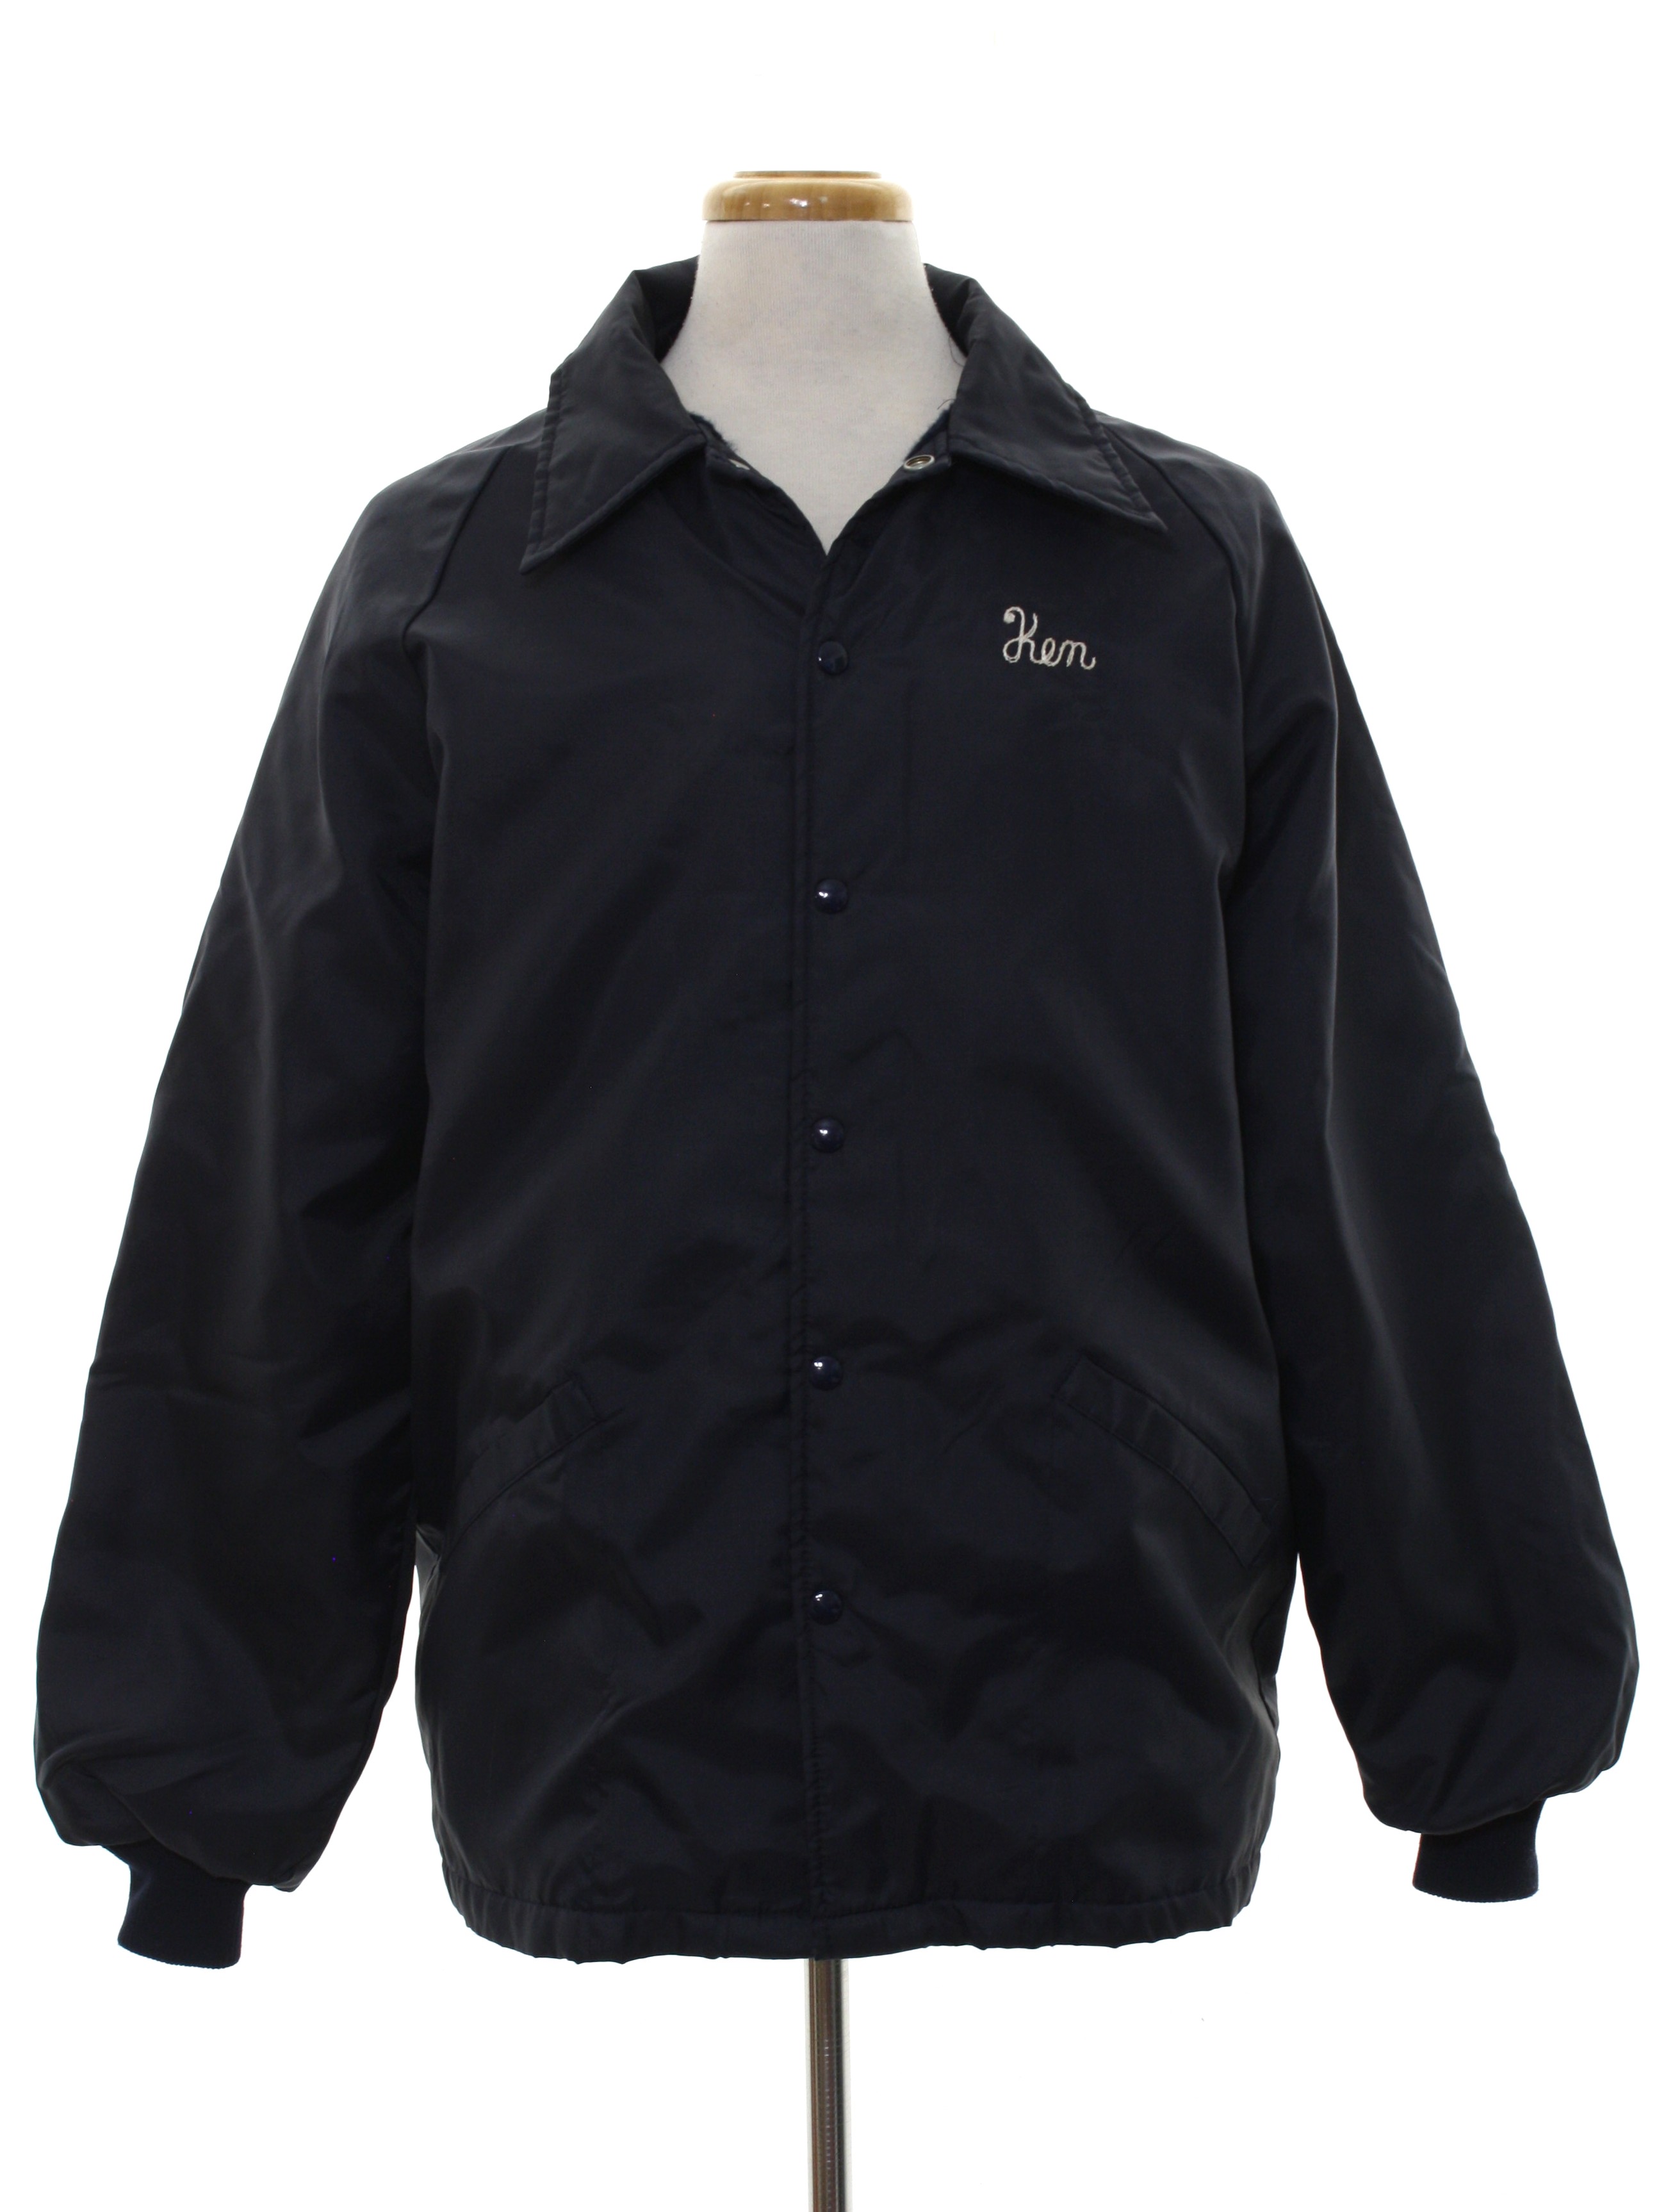 Retro 70's Jacket: Late 70s or Early 80s -Swingster- Mens midnight blue ...